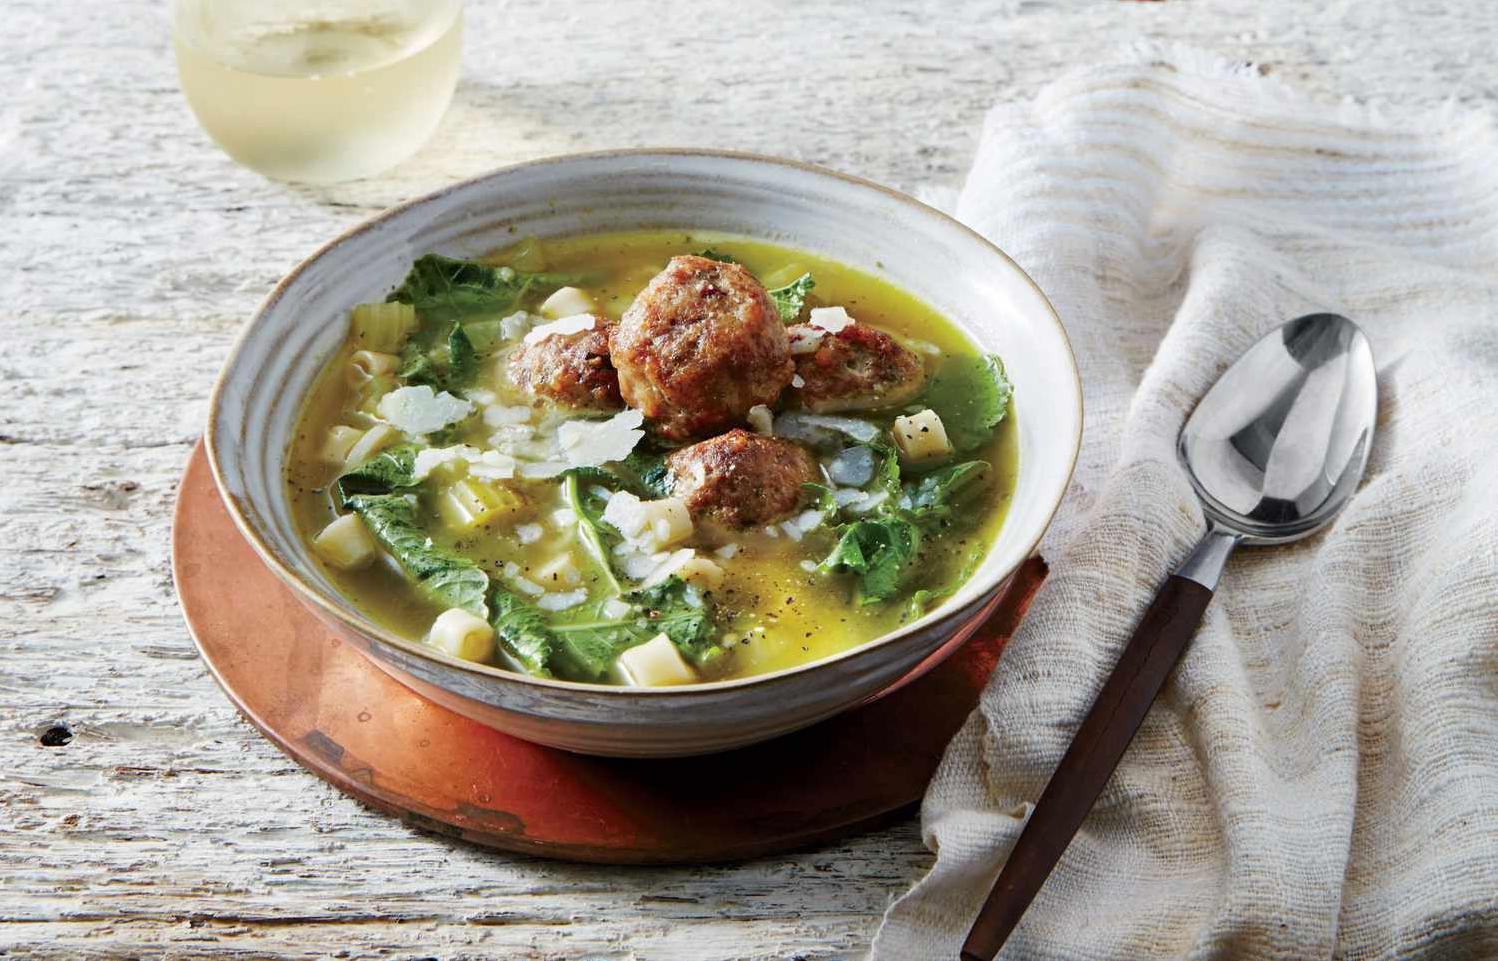  Get ready to tie the knot with this hearty and flavorful Italian Wedding Soup - Southern Style!